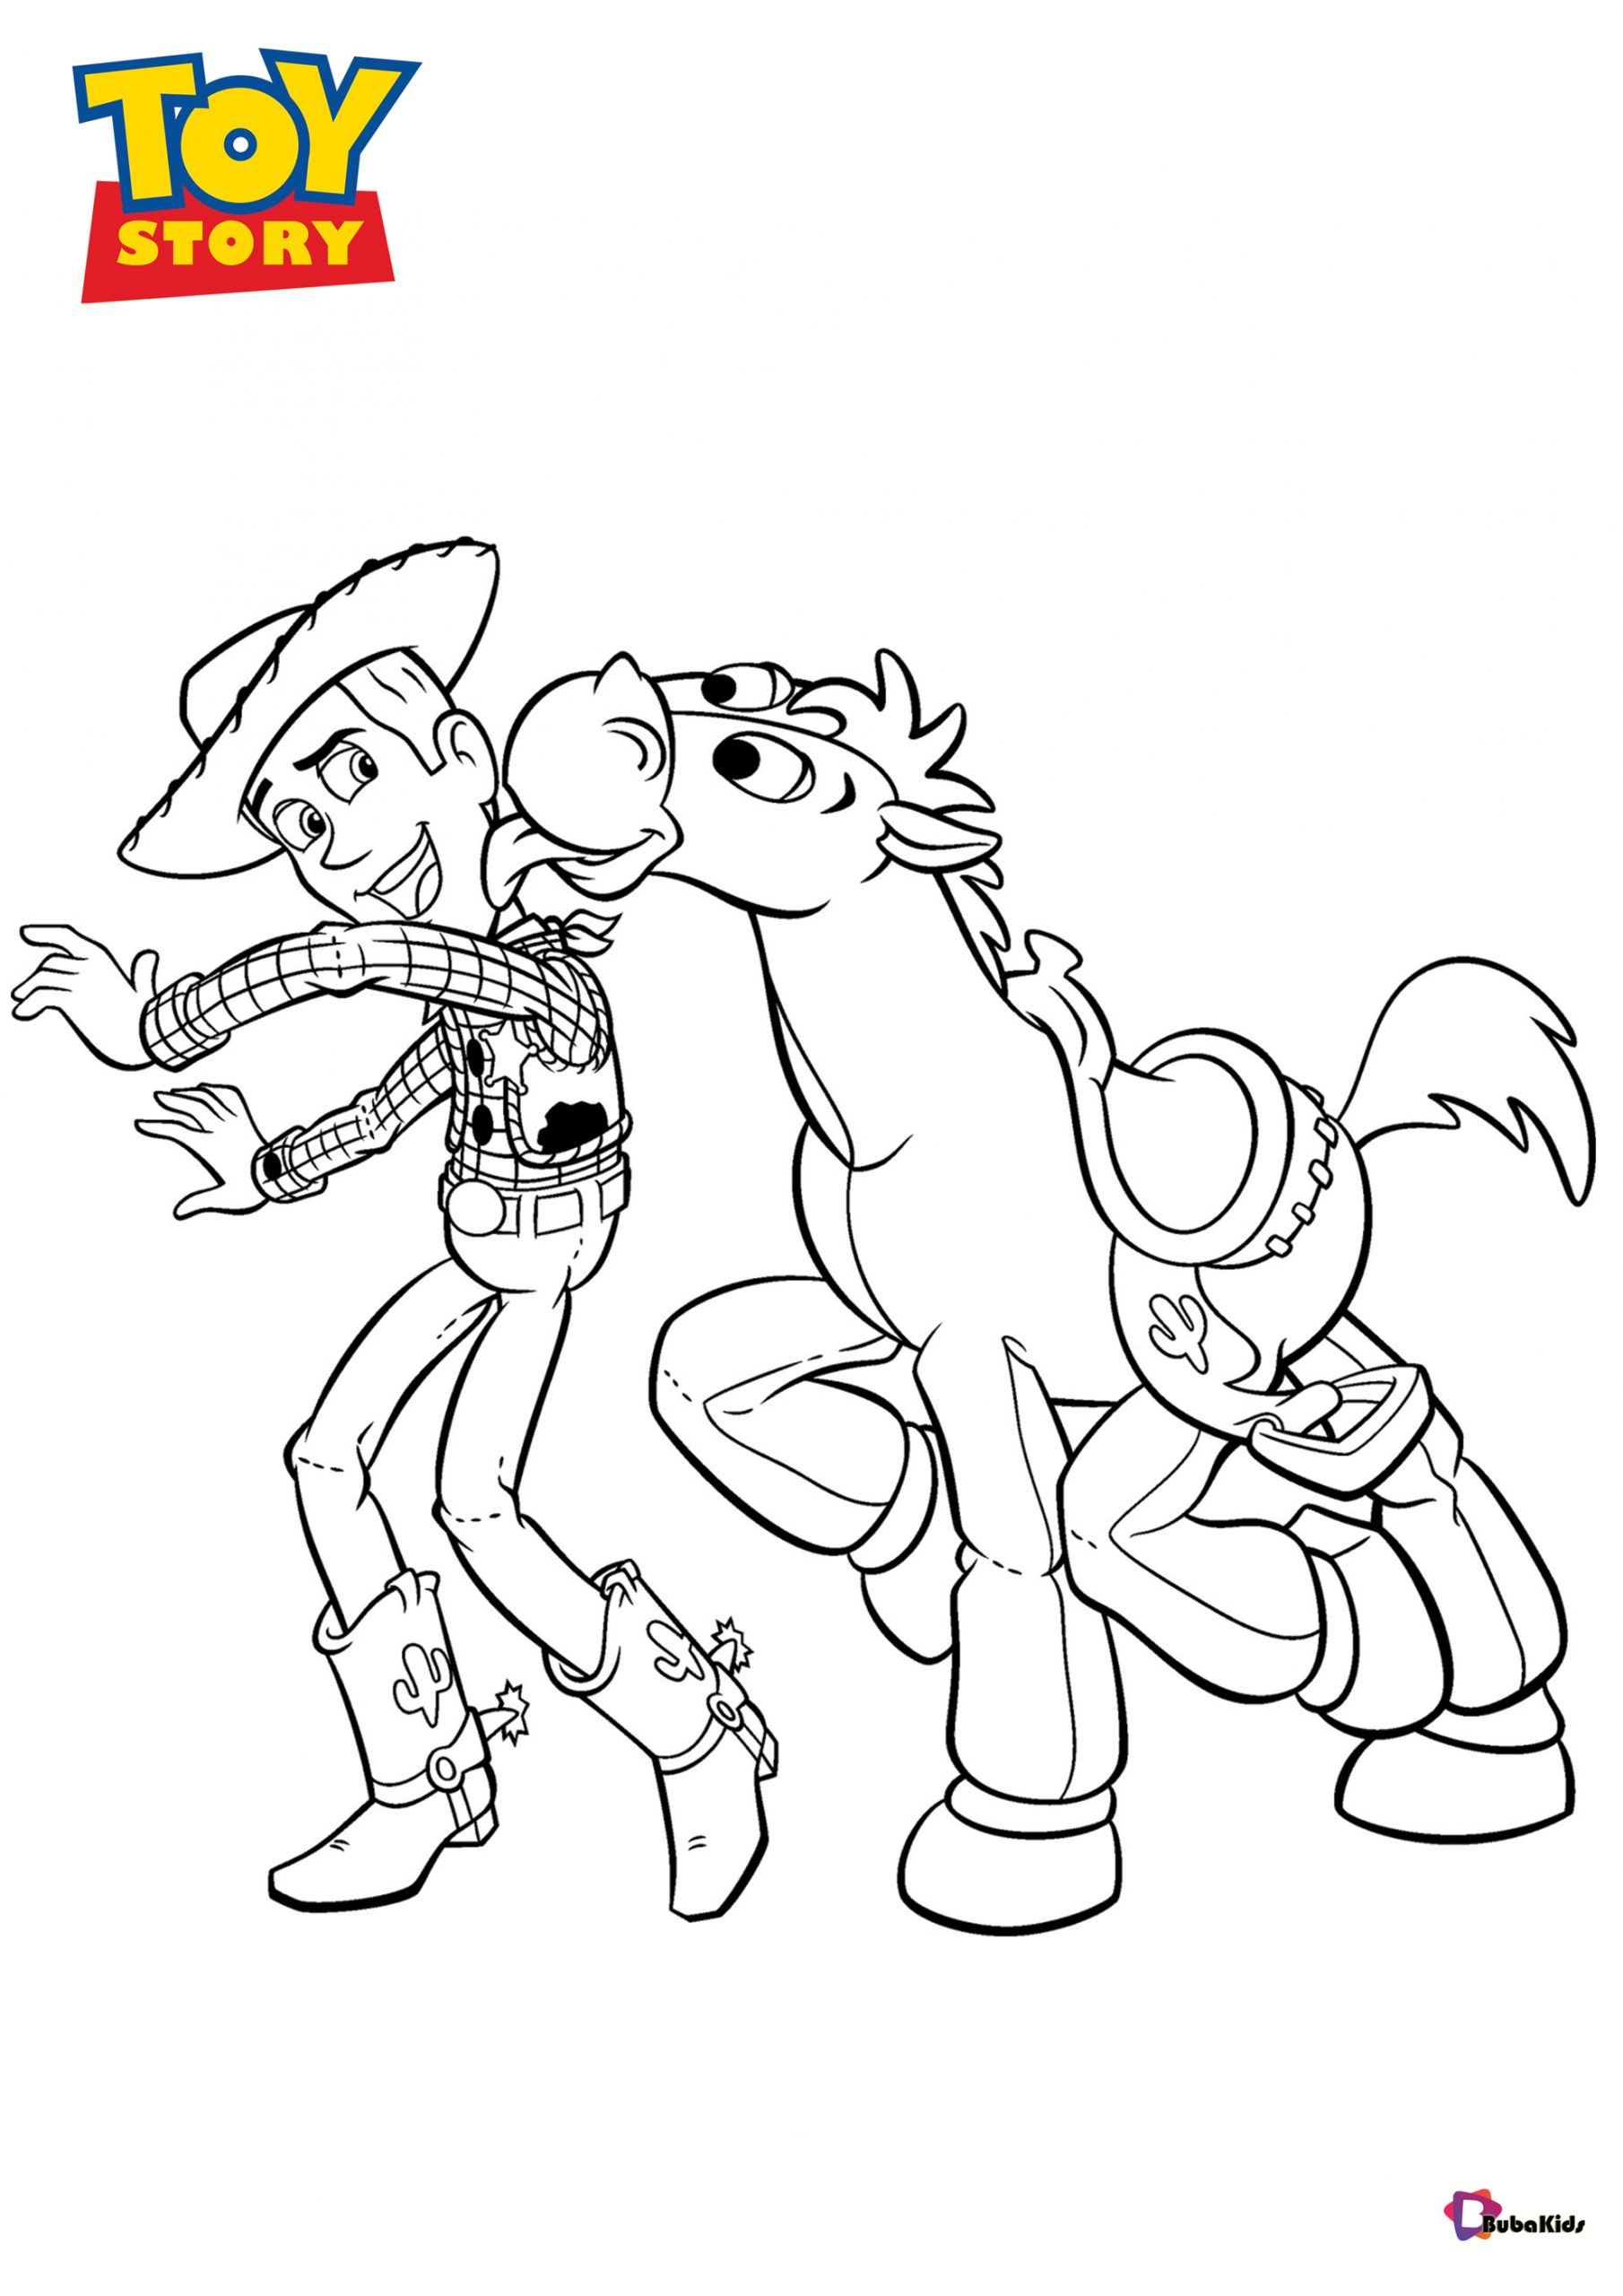 Sheriff Woody coloring page from Toy Story printable coloring pages for kids Wallpaper